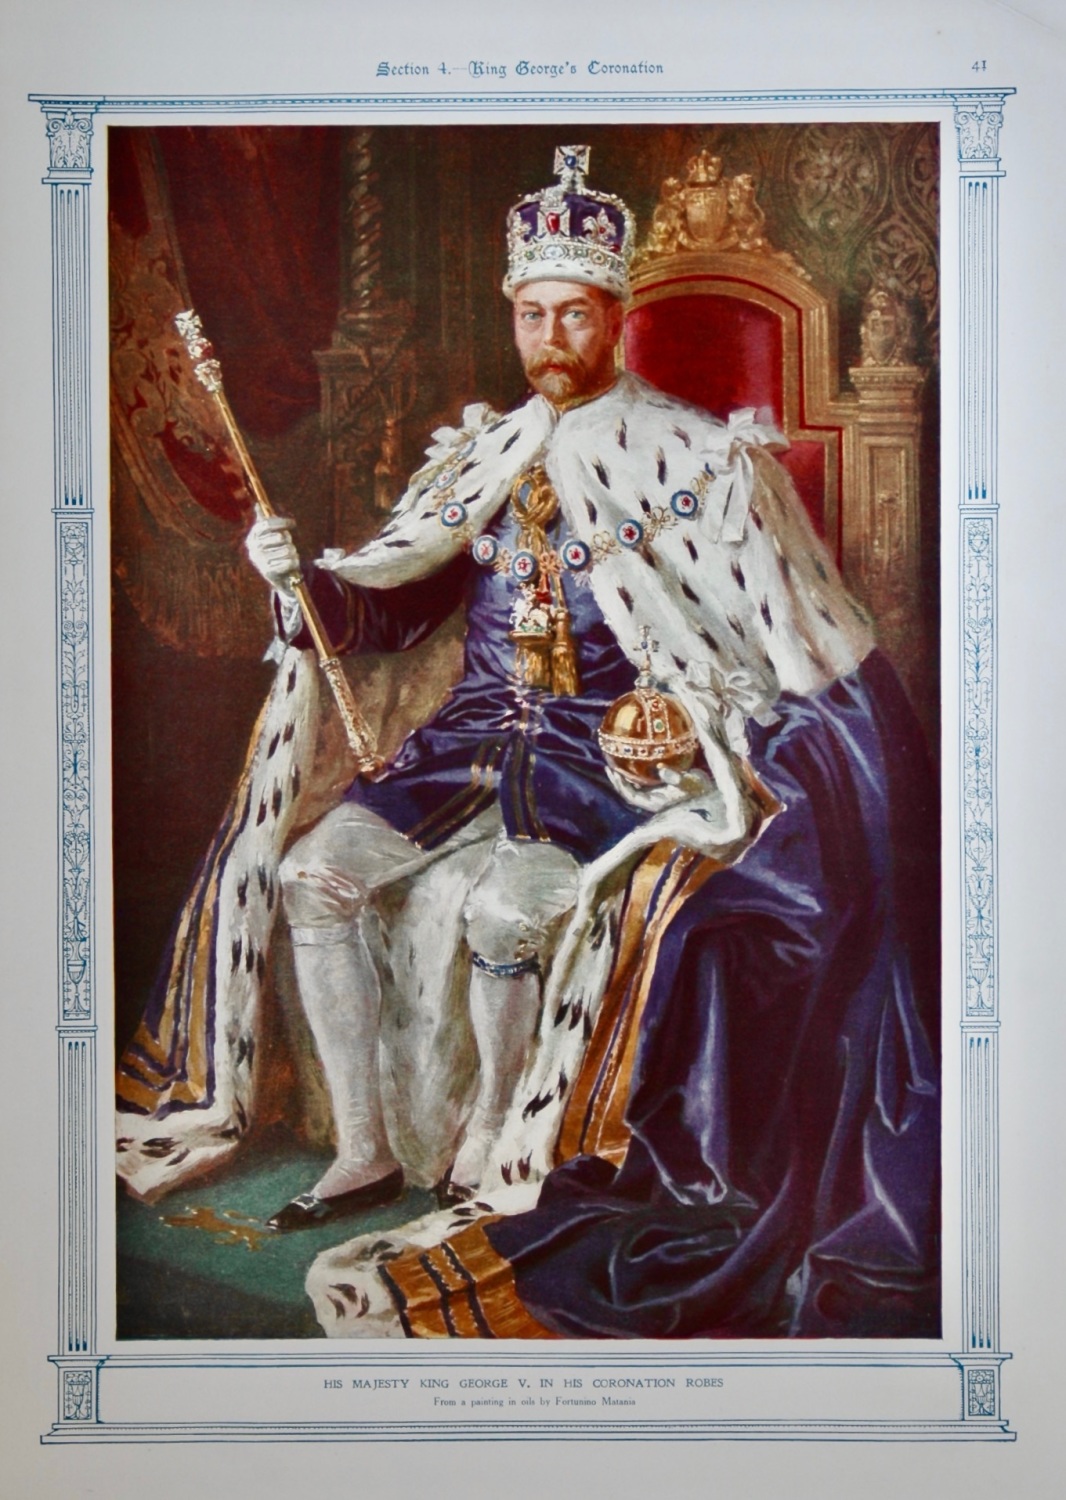 His Majesty King George V. in His Coronation Robes.  1911.